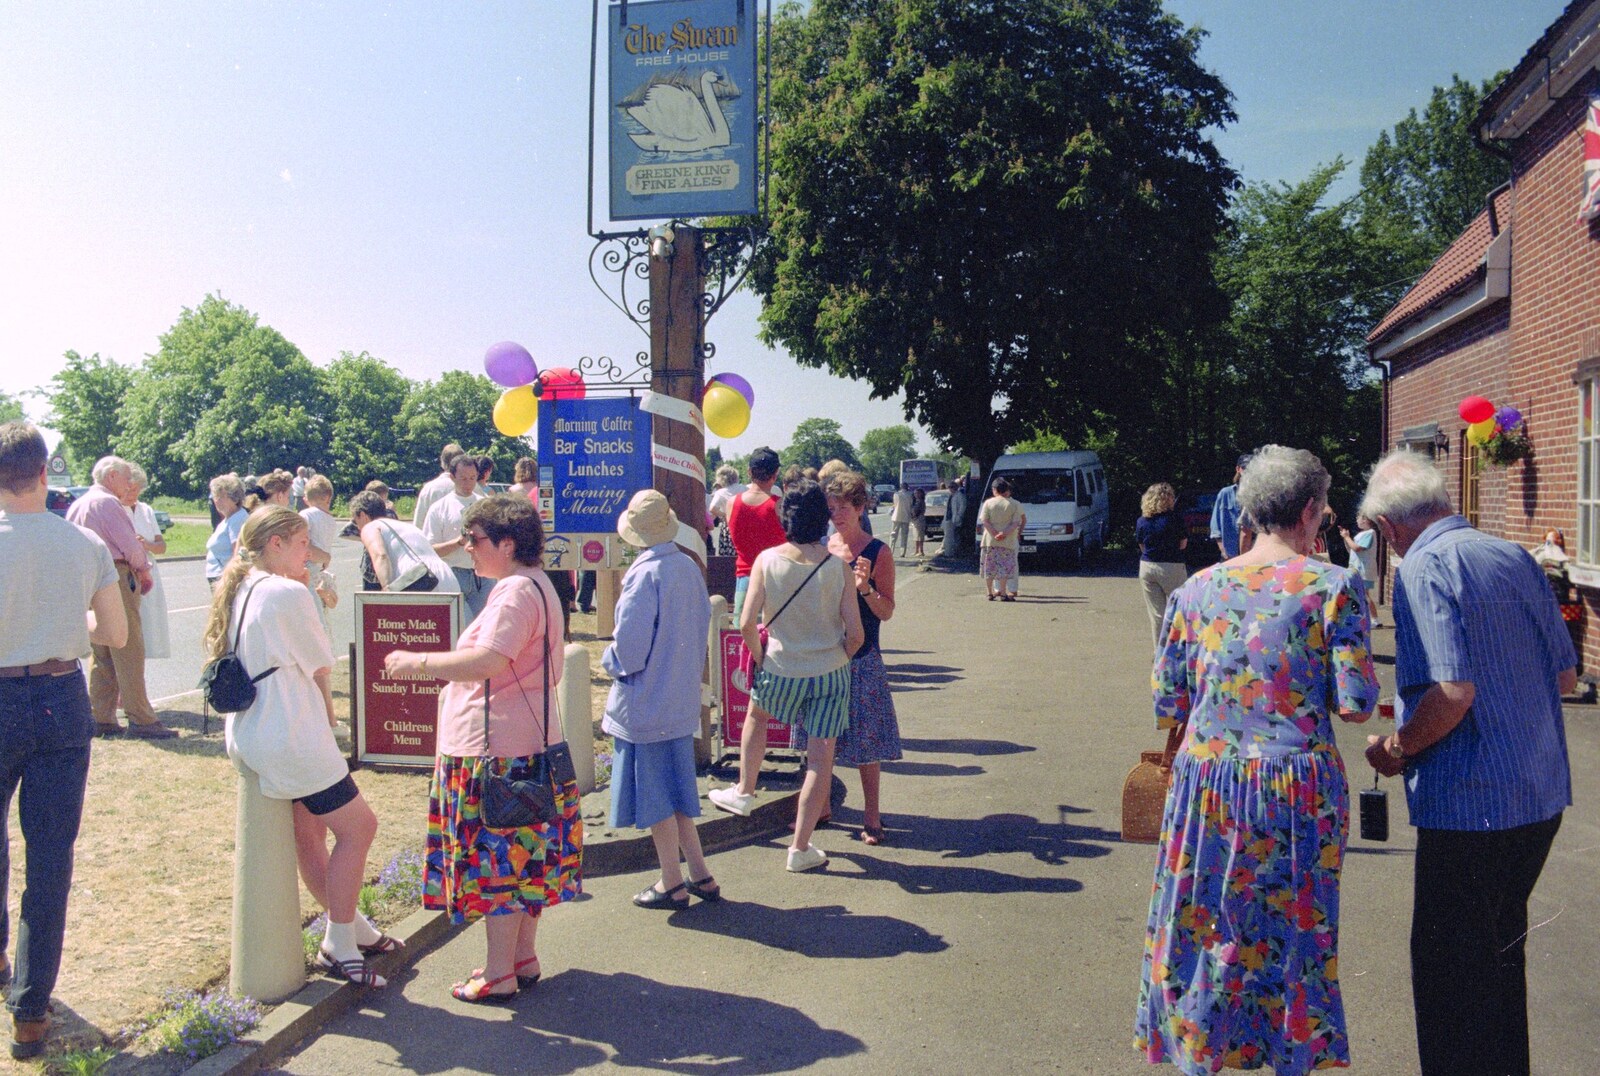 Crowds hang around outside the Swan from The Norwich Union Mail Coach Run, The Swan Inn, Brome - 15th June 1996